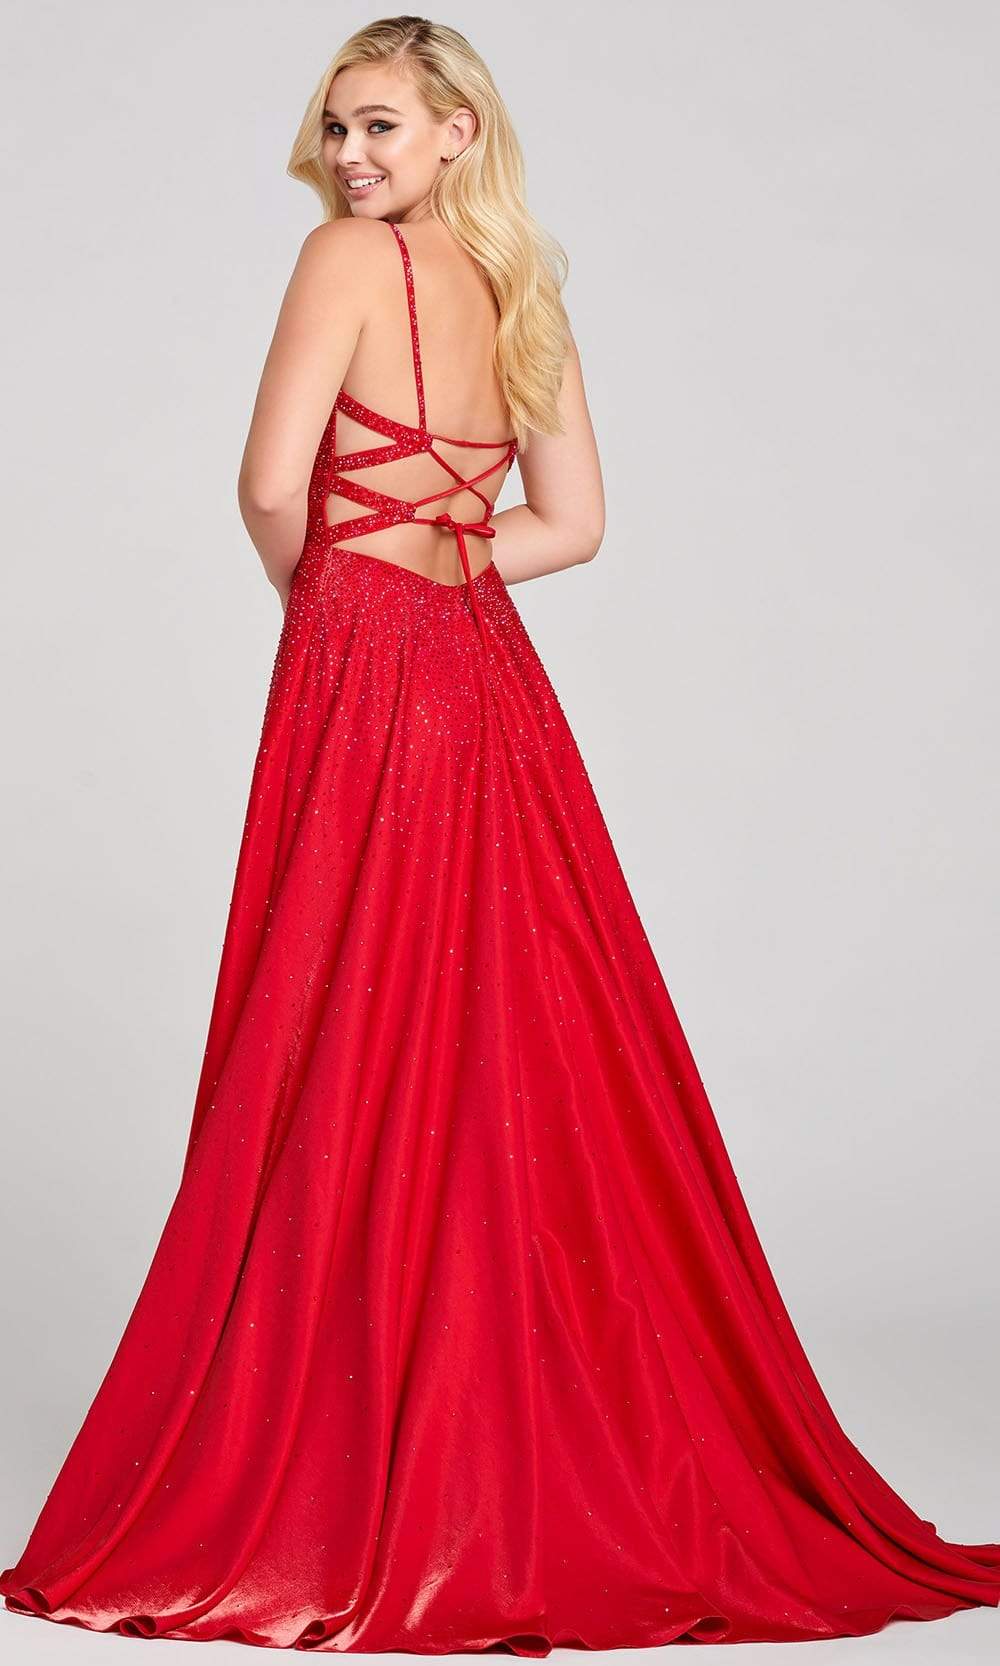 Ellie Wilde - EW121001 Strappy Open Back Crystal Studded Satin Gown Prom Dresses